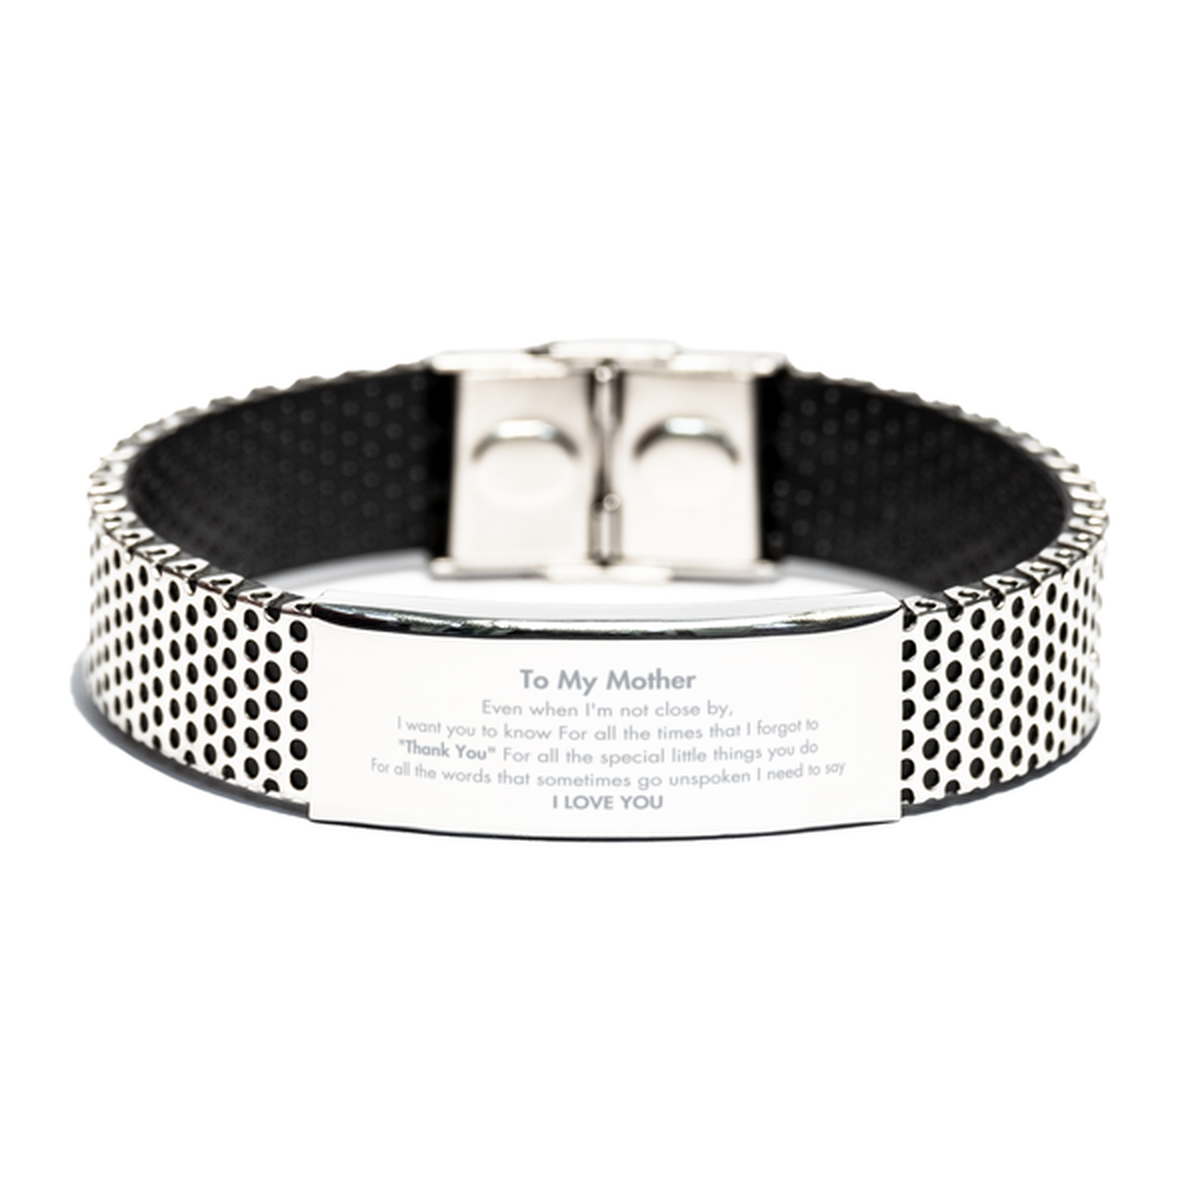 Thank You Gifts for Mother, Keepsake Stainless Steel Bracelet Gifts for Mother Birthday Mother's day Father's Day Mother For all the words That sometimes go unspoken I need to say I LOVE YOU